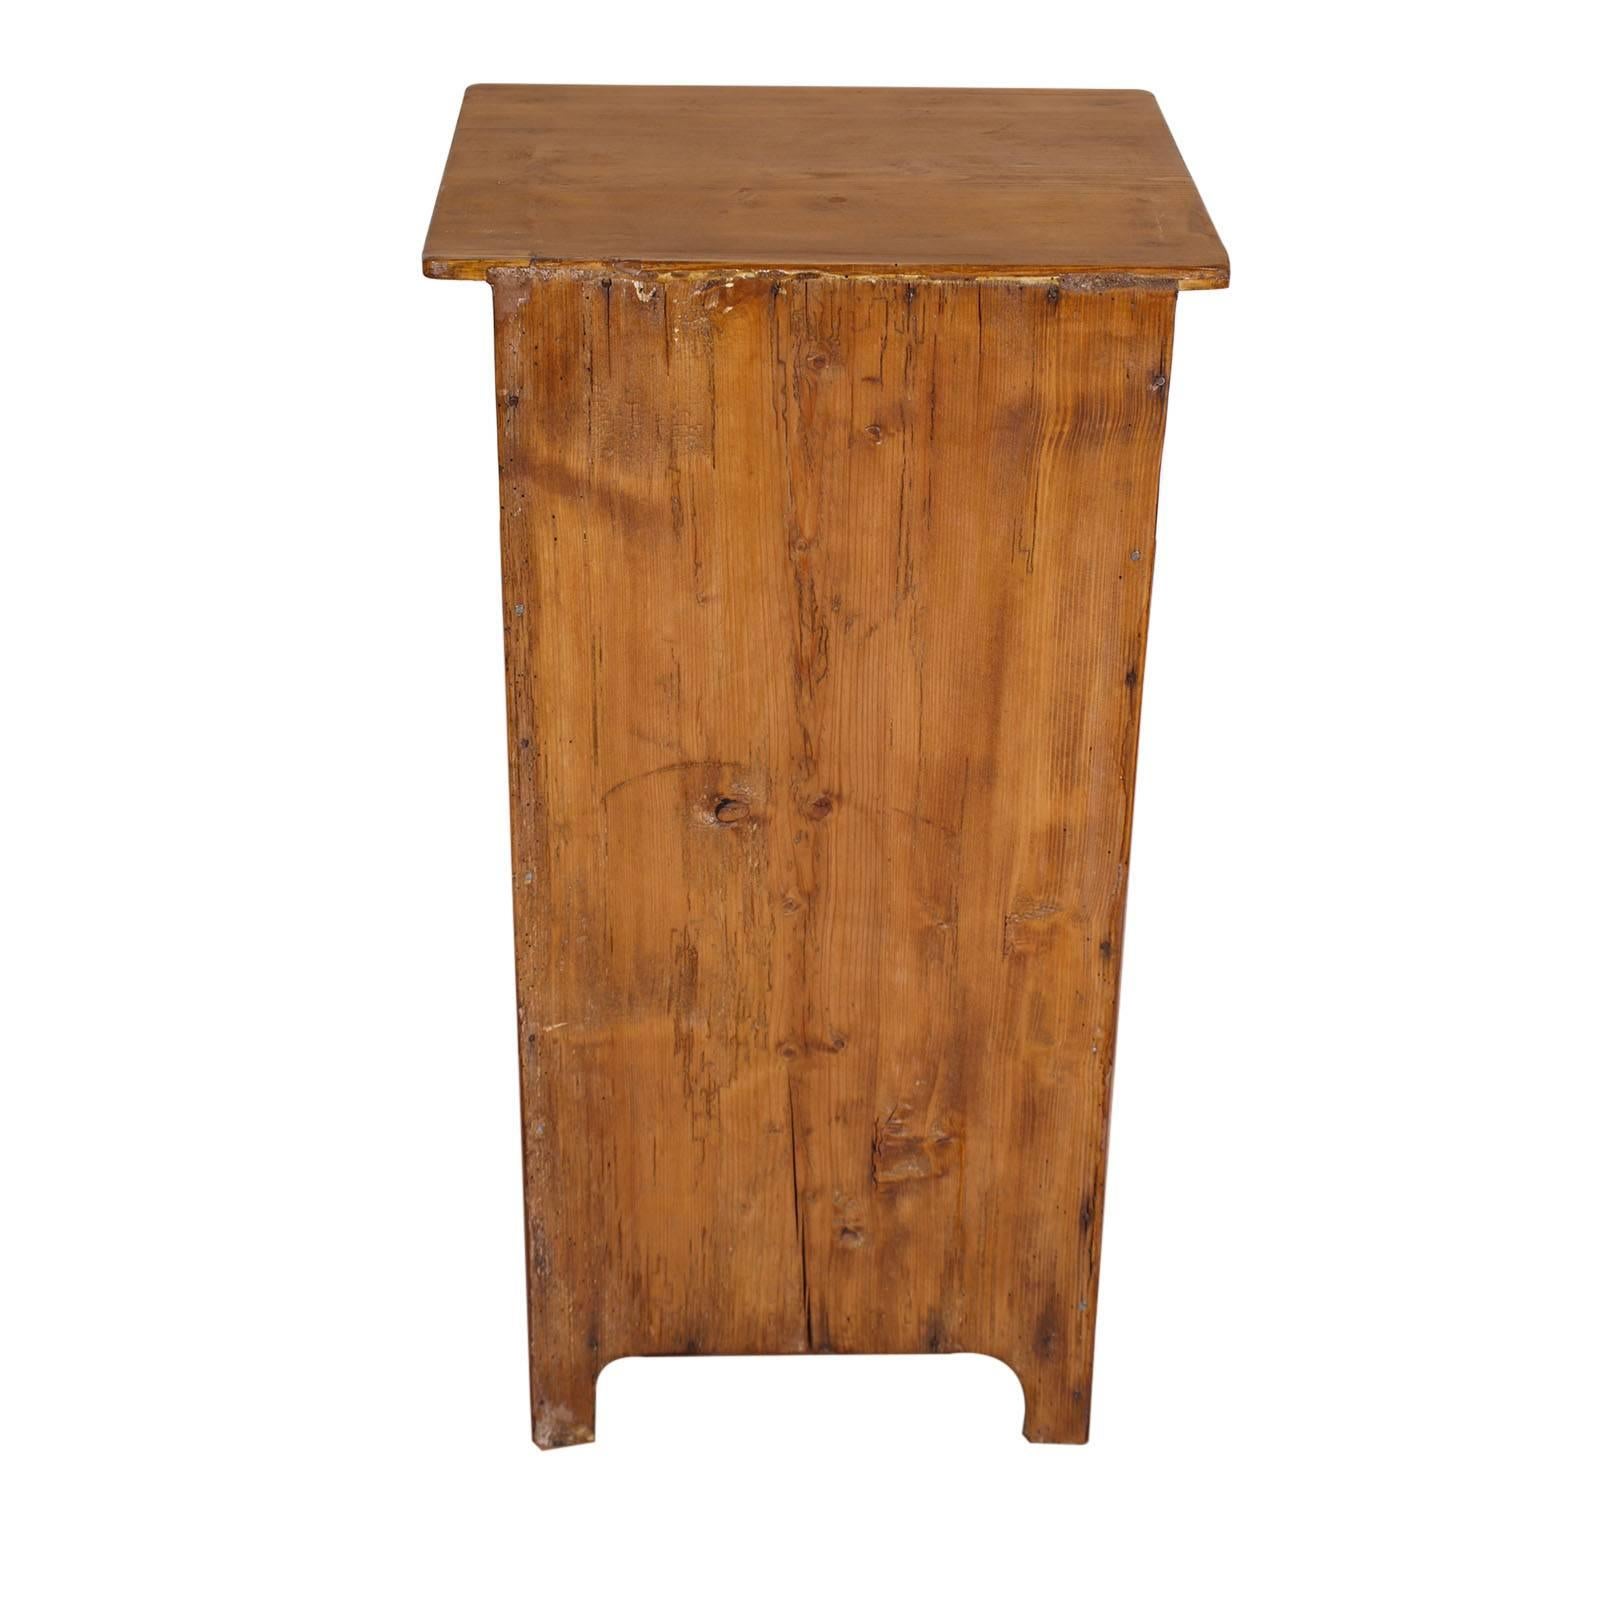 19th Century Country Rustic Tyrolean Nightstand Larch Restored Polished Wax For Sale 1